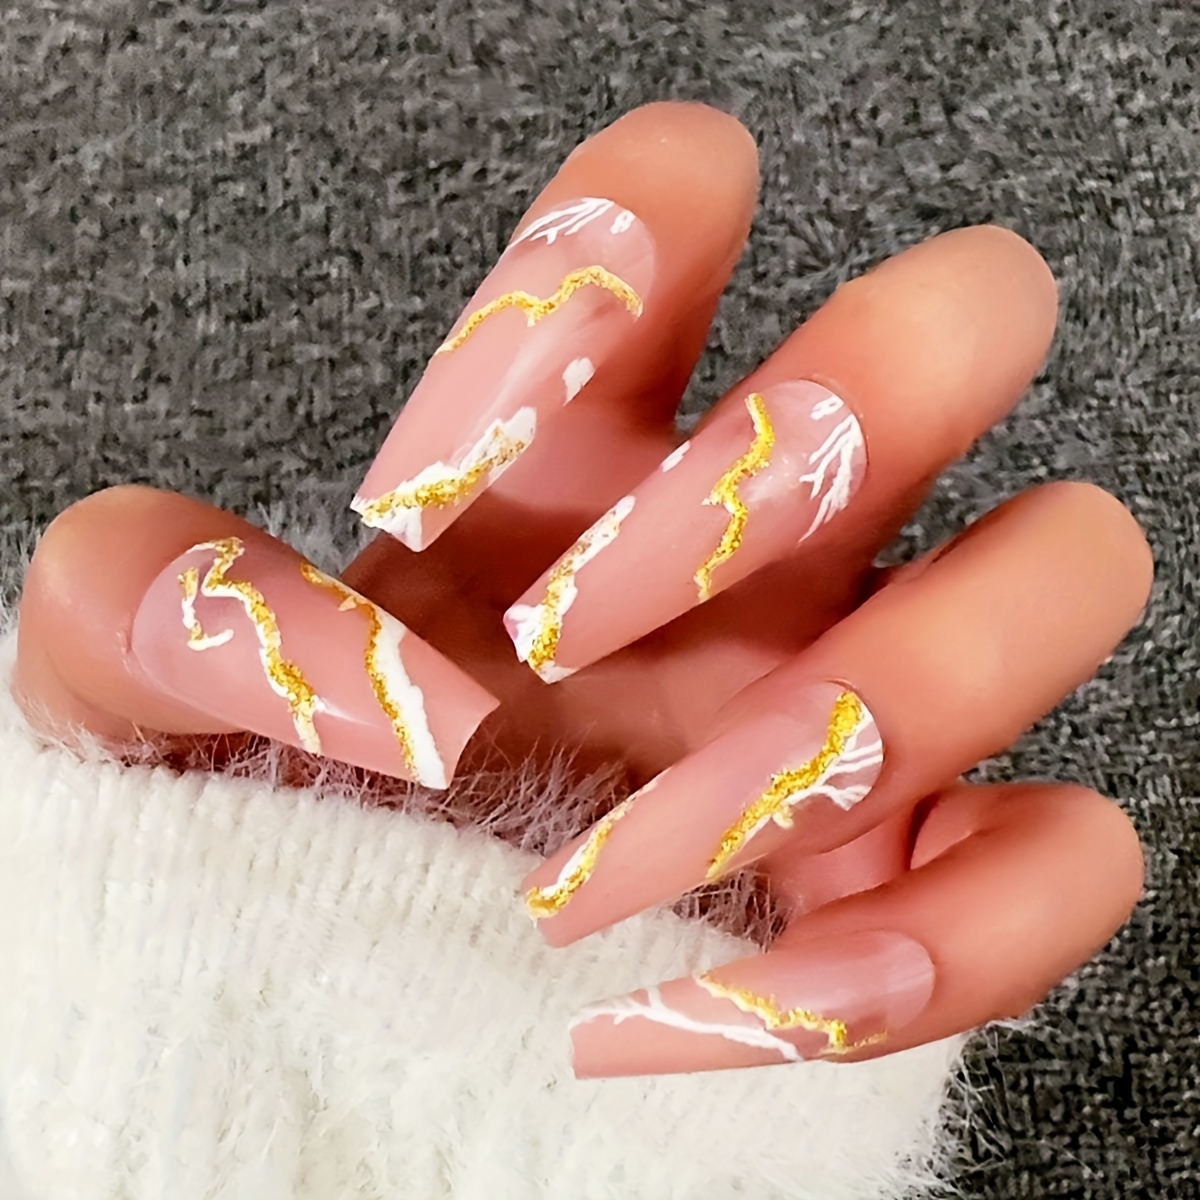 Nude Press On Nails, Long Coffin Fake Nails With White And Golden